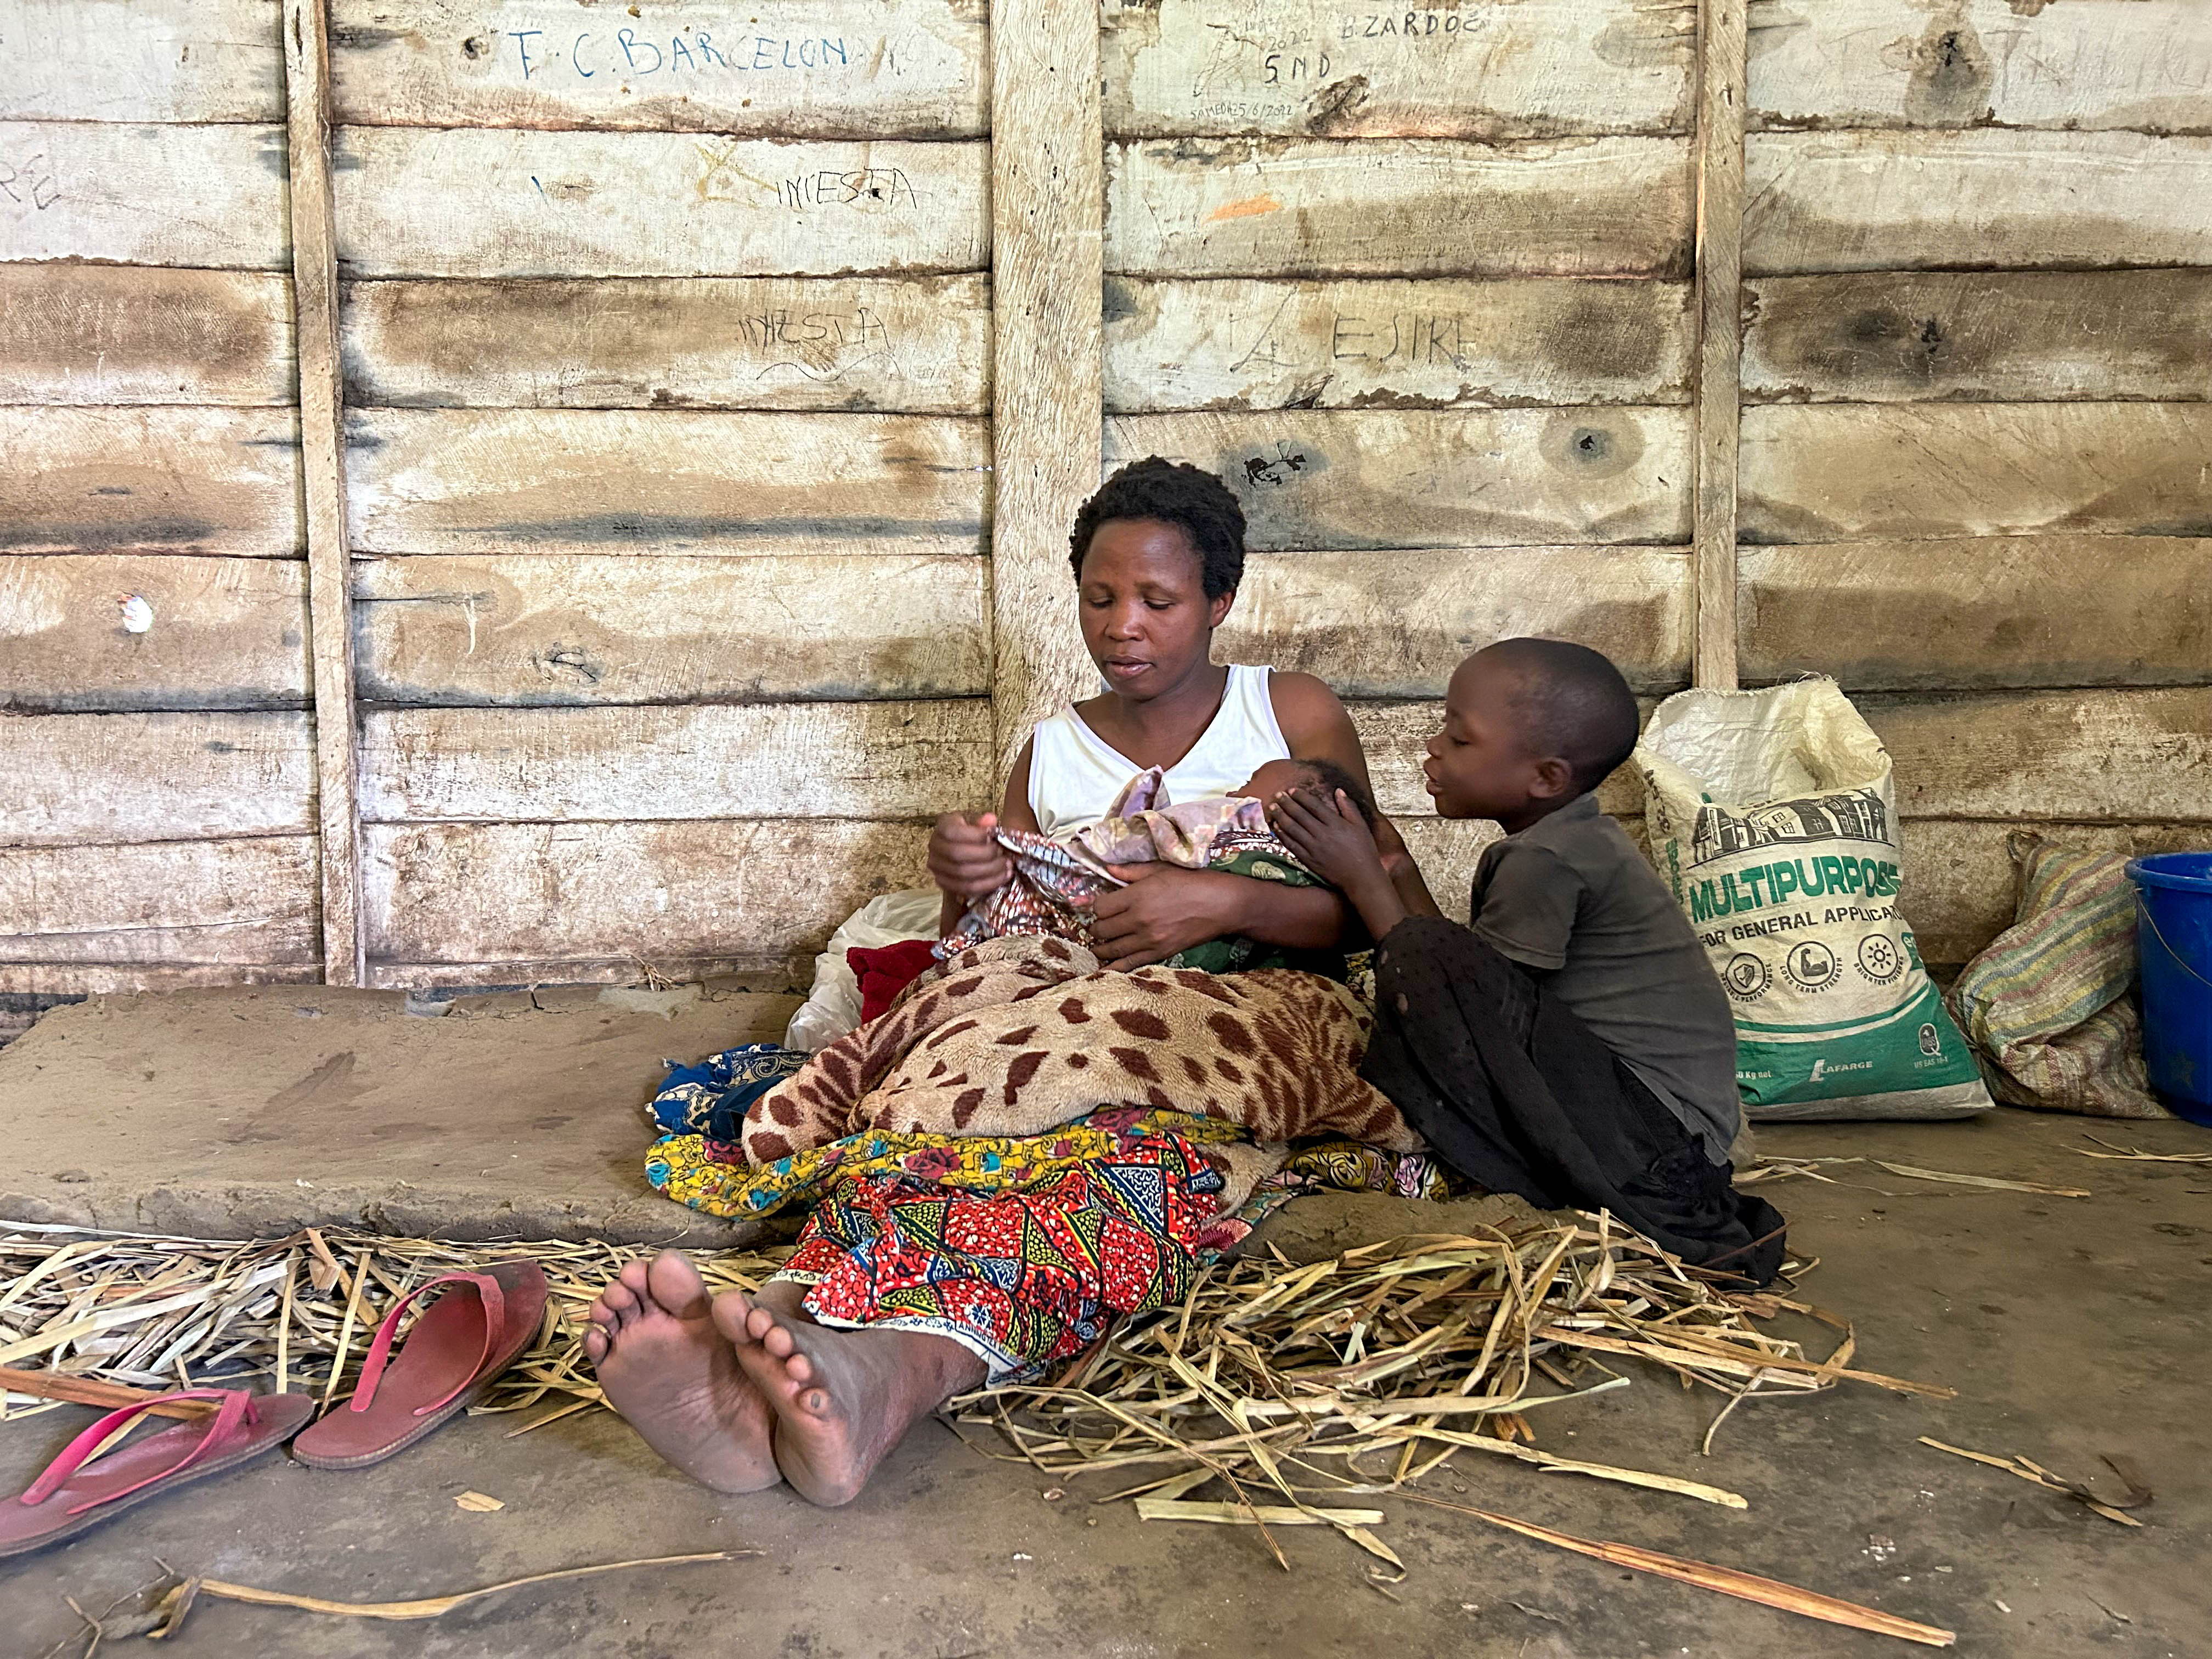 "I'm pregnant, so I wanted to be as close as possible to the hospital". ​ Nirasafari, aged 41, has been taking refuge with her youngest son Dukuze for several weeks in a school in Mweso. ​ "The armed men came to my village in April. My husband was killed, so I fled alone with my youngest son. We took refuge in the bush and then came here. I'm pregnant, so I wanted to be as close as possible to the hospital". ​ Three weeks ago, Nirasafari gave birth to her baby Ishara at the Mweso general referral hospital, supported by MSF since 2005 in collaboration with the Ministry of Health. "My first children have already grown up and started their own families, but Ishara, who has just been born, will never know his father. ​ This is the second time she has fled the fighting. Photographer: Laora Vigourt | DRC | 16/08/2023